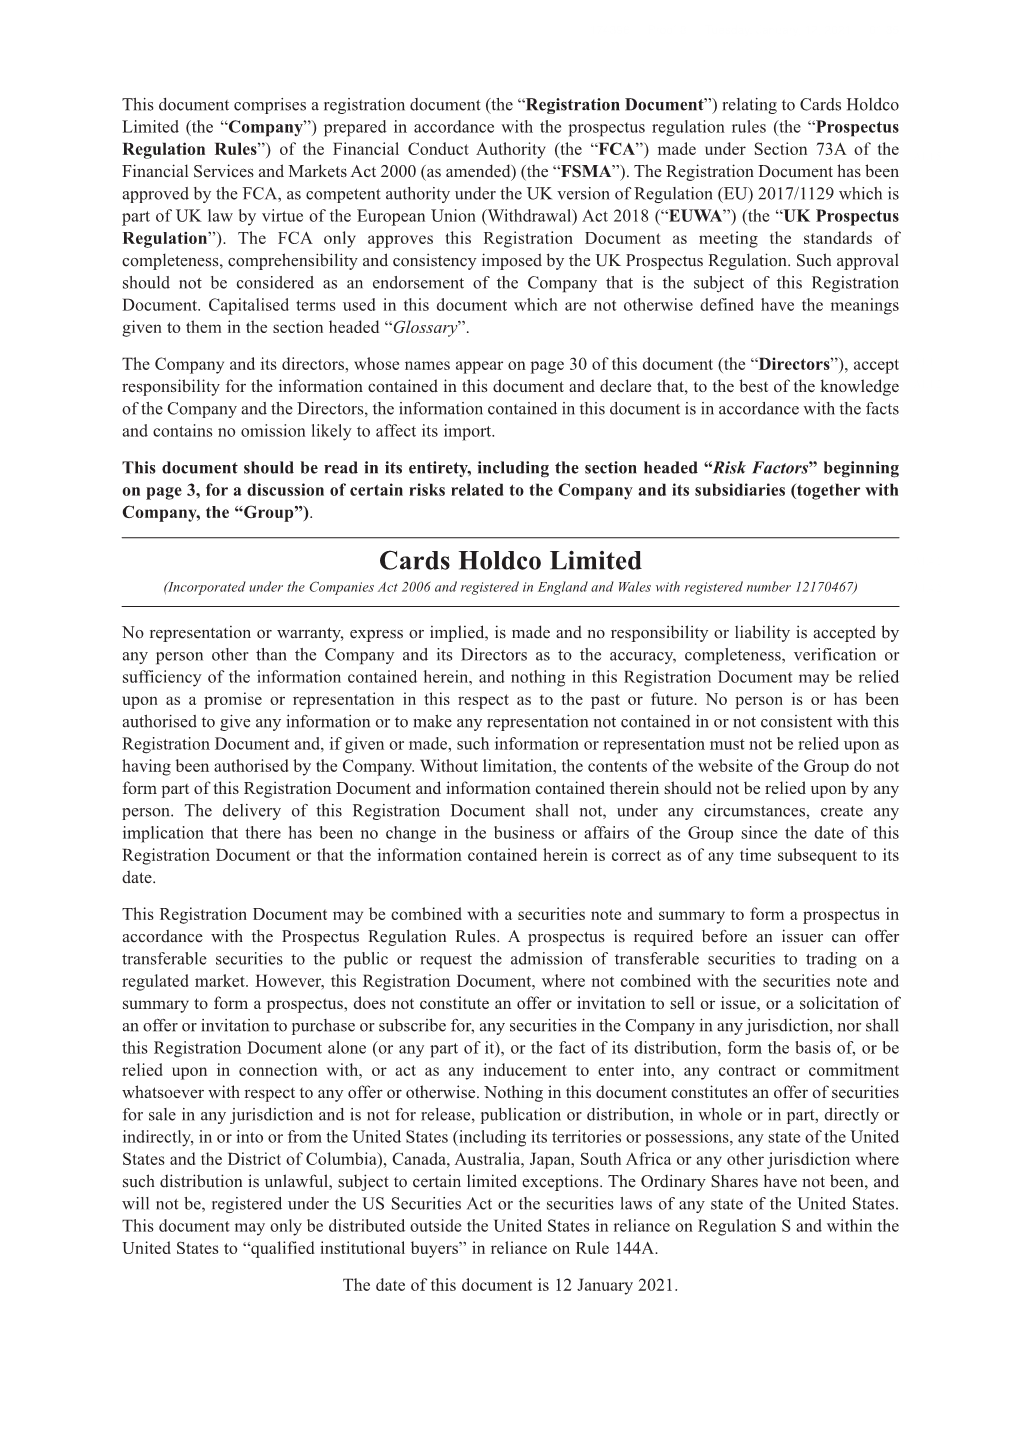 Cards Holdco Limited (The “Company”) Prepared in Accordance with the Prospectus Regulation Rules (The “Prospectus